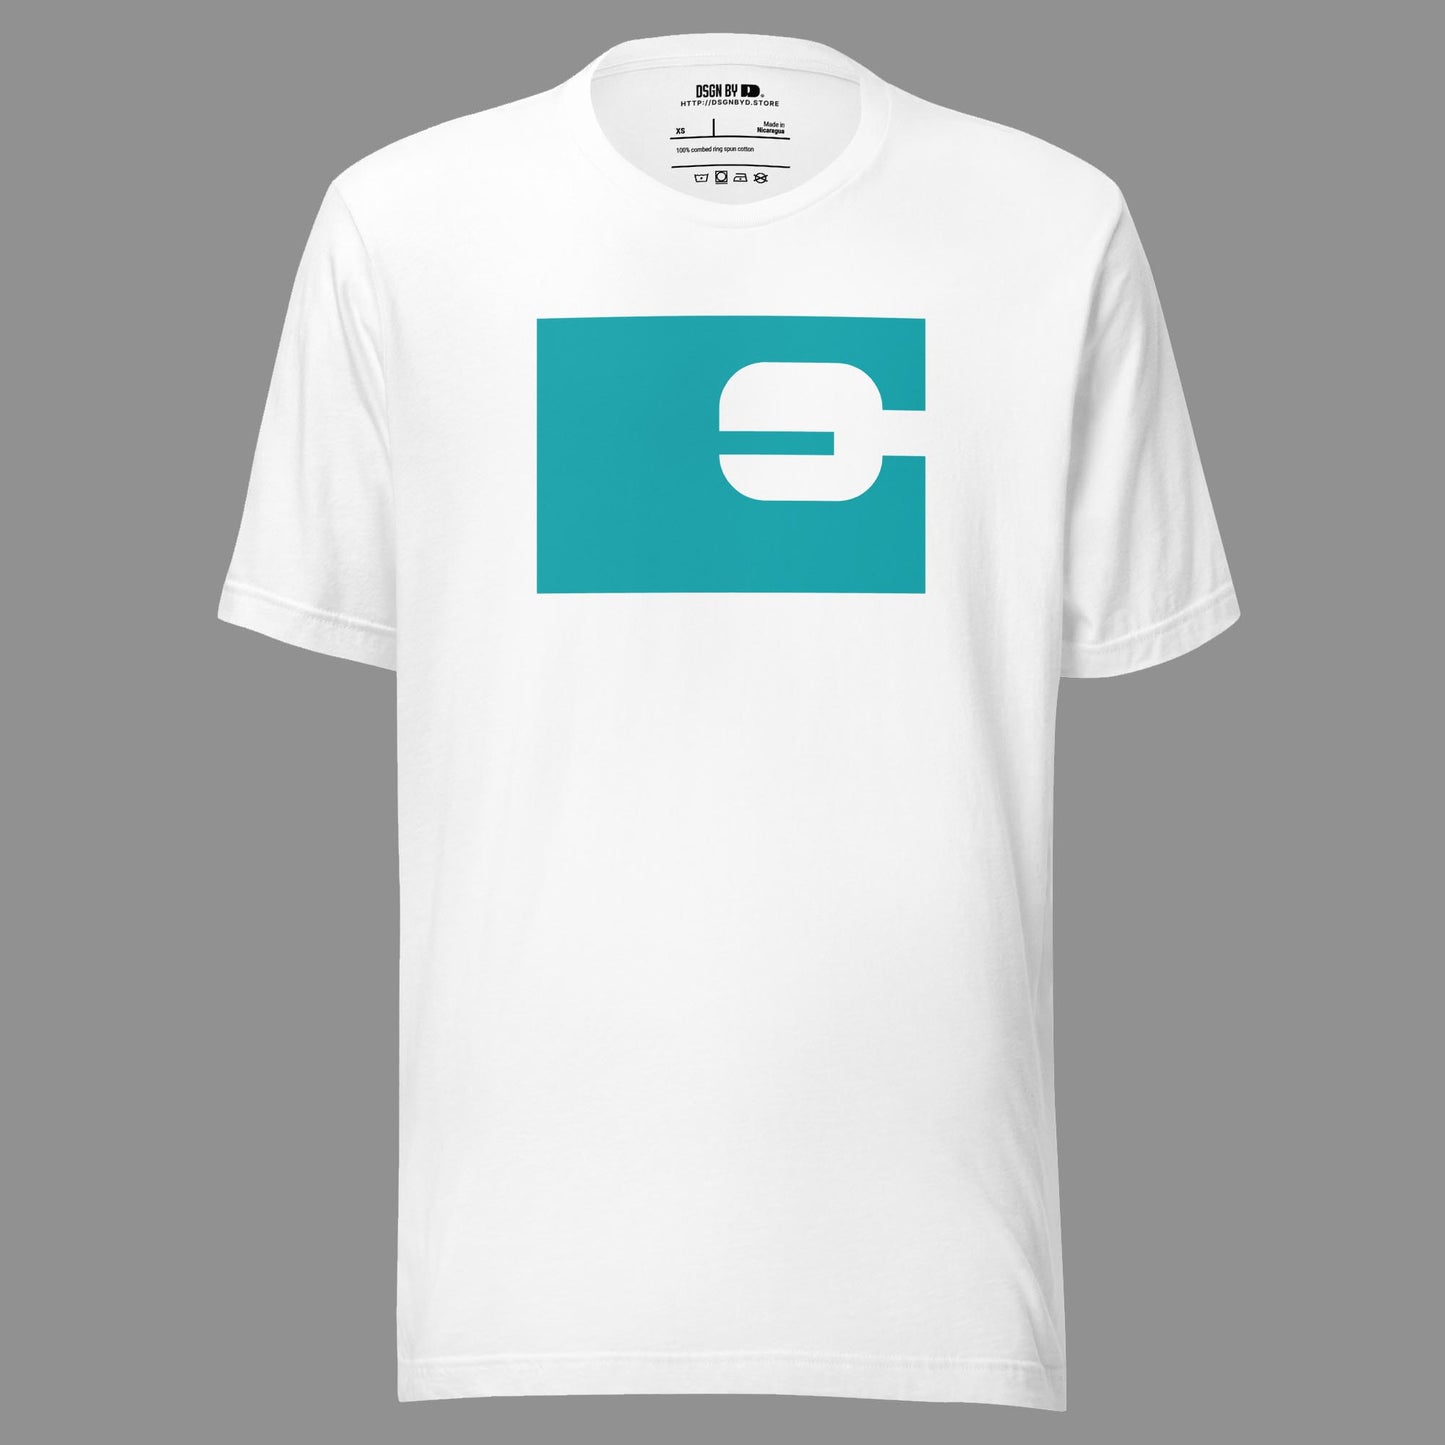 A white cotton unisex graphic tee with letter E.